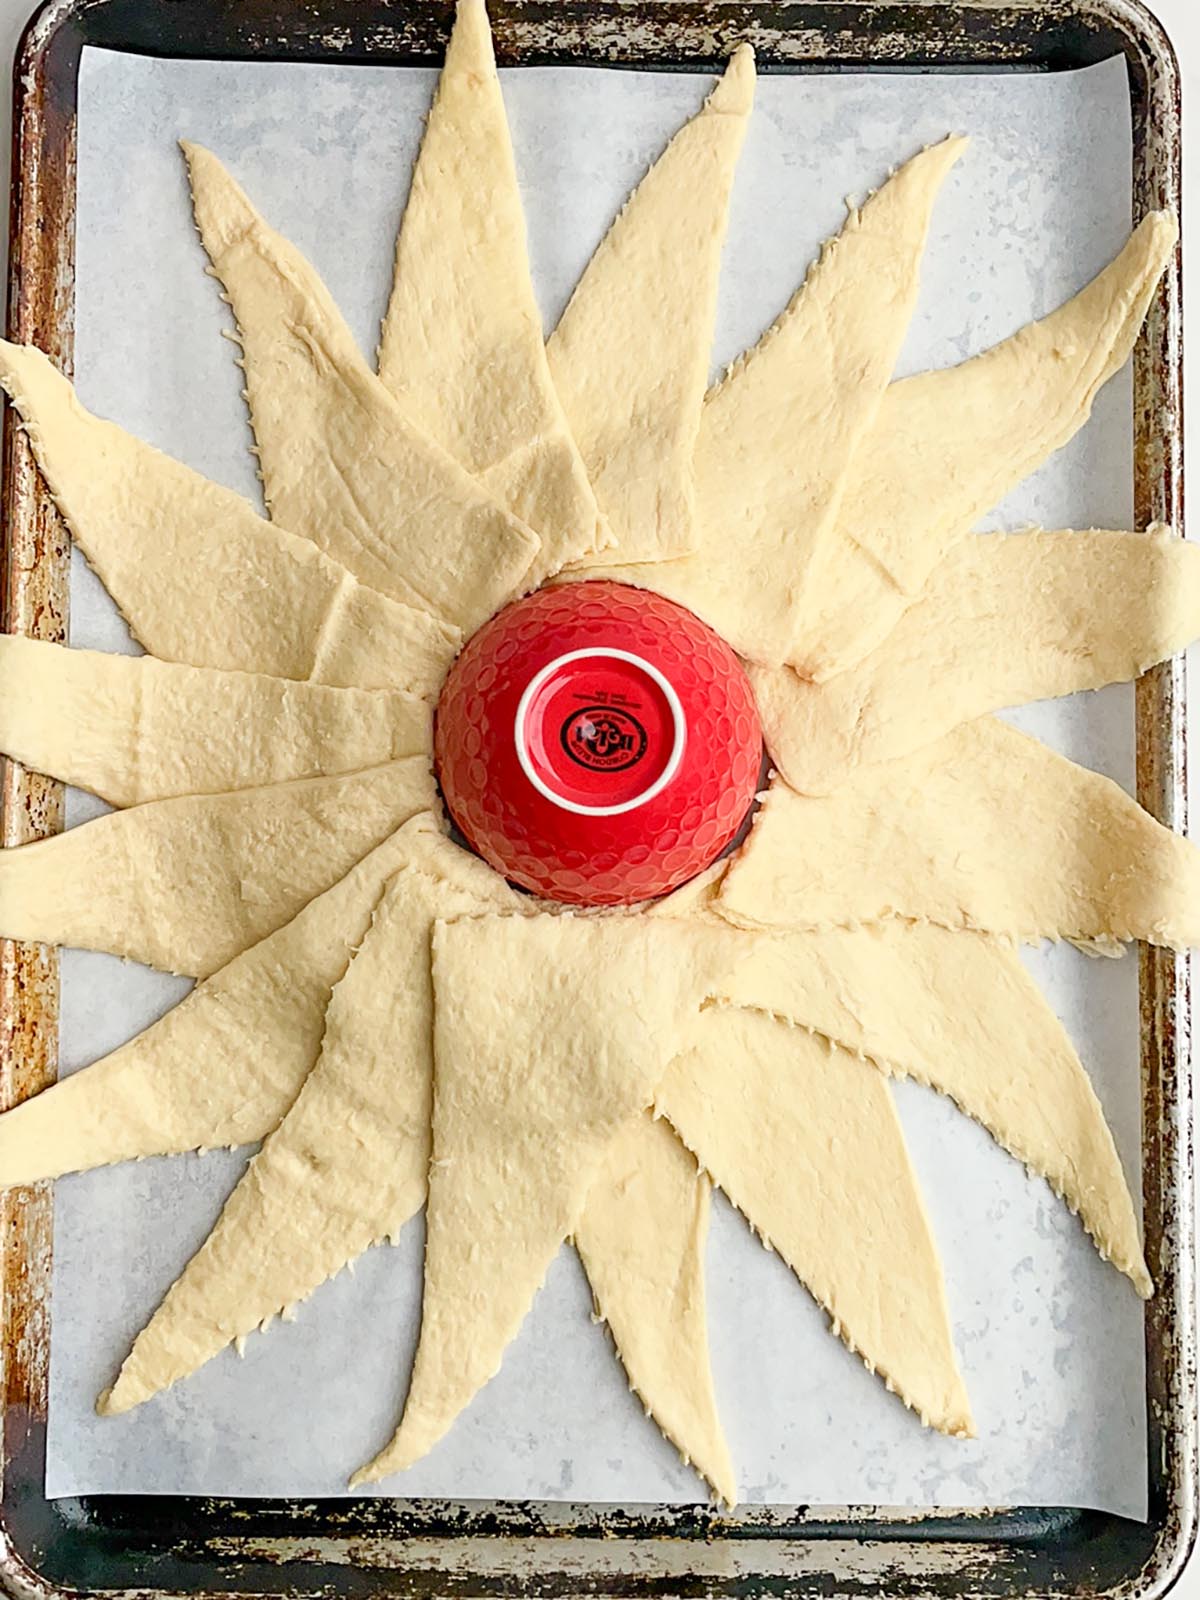 crescent roll dough arranged in the shape of the sun